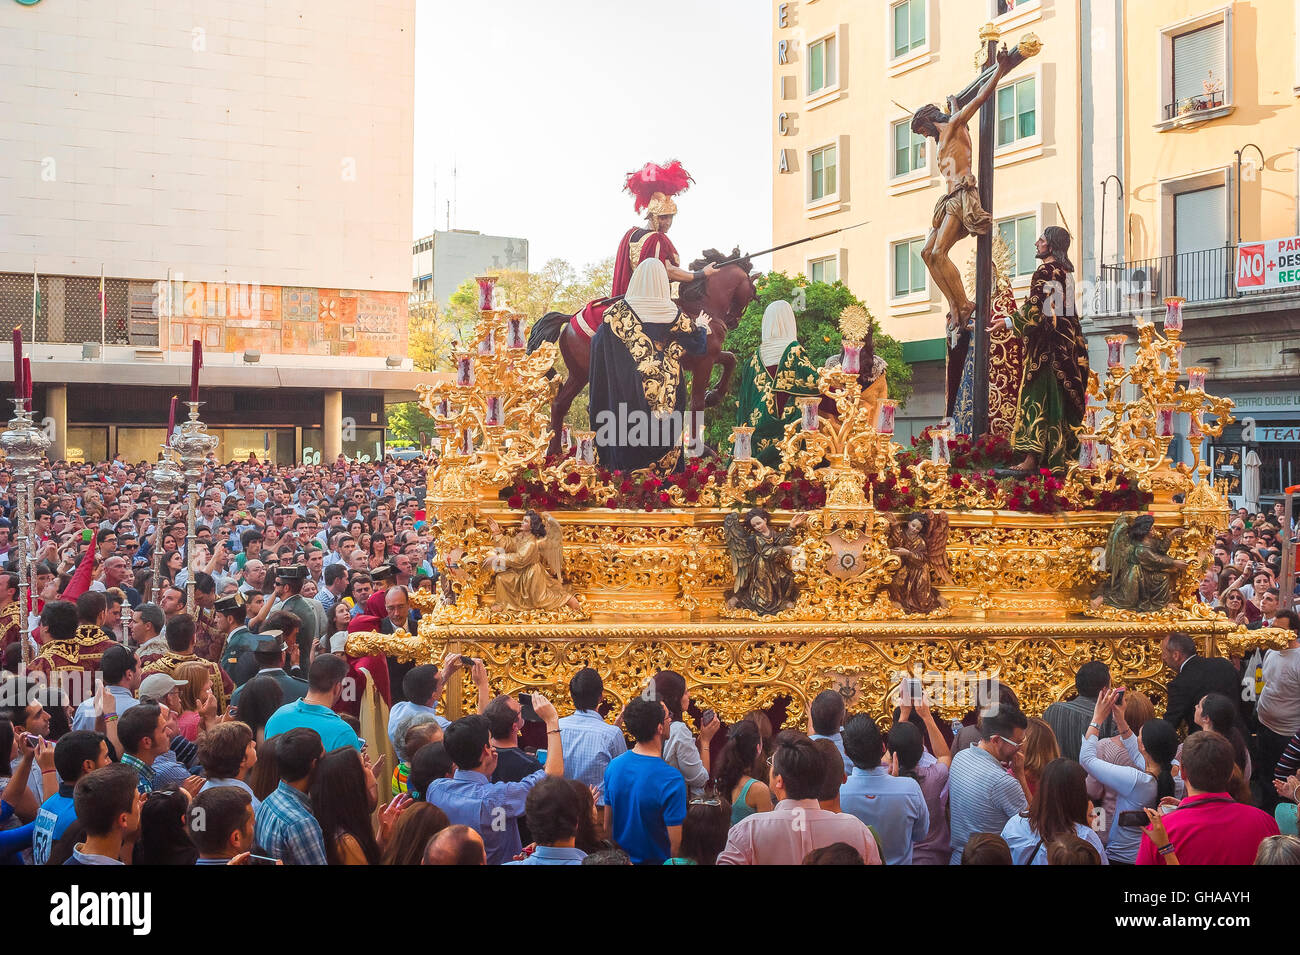 Seville Spain Easter, a huge ornate float bearing a crucifixion scene processes through the streets of Seville in the Semana Santa festival, Spain Stock Photo